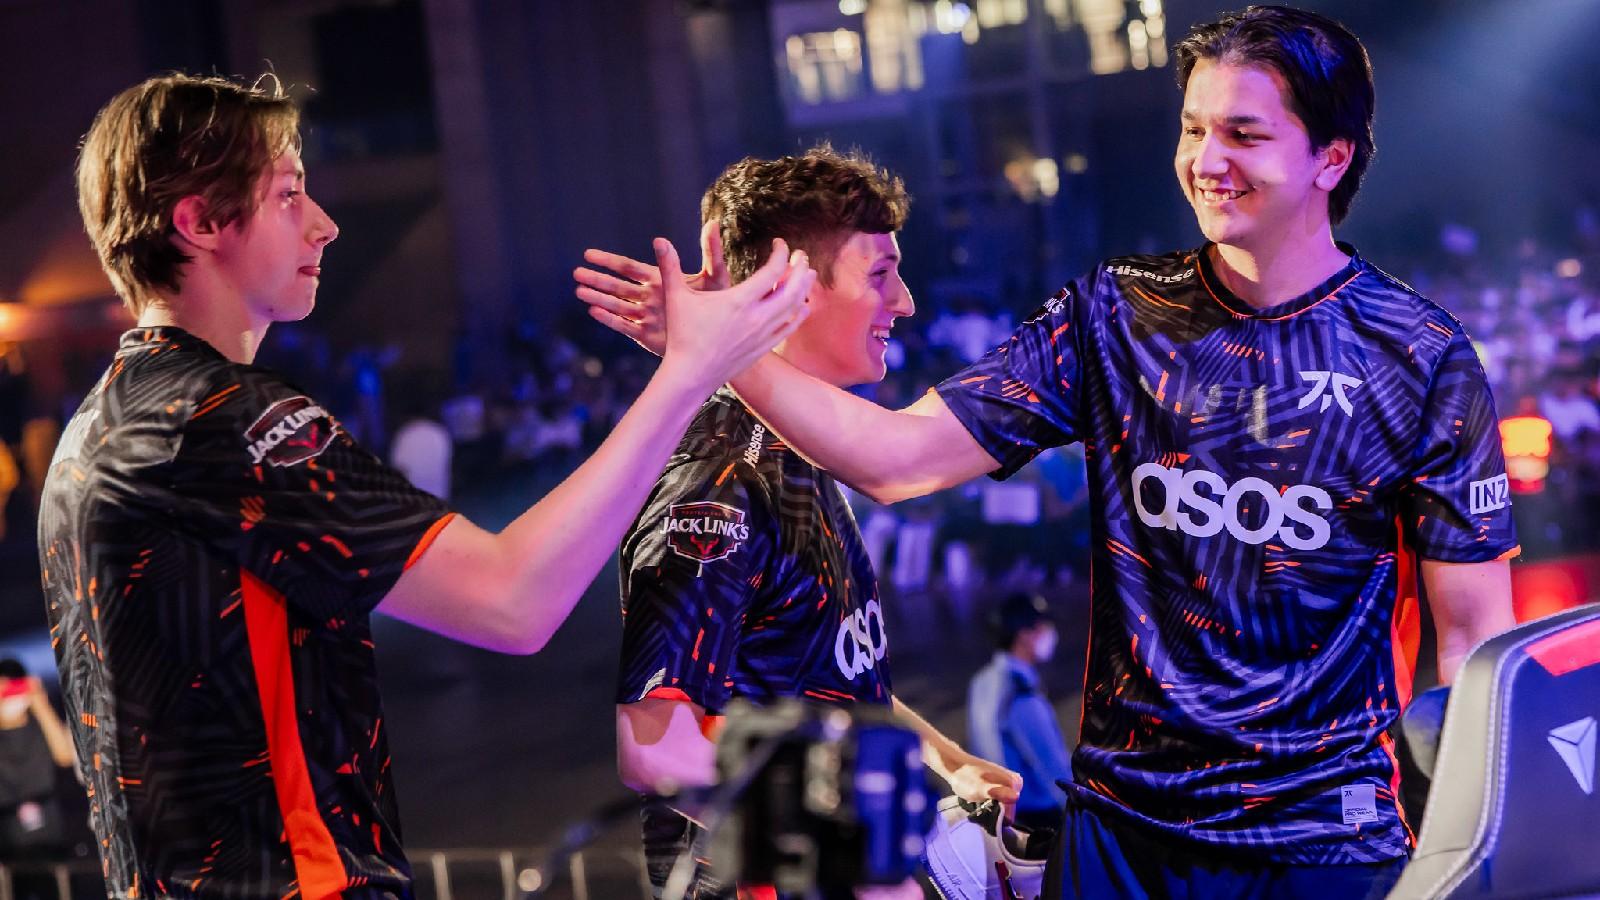 Fnatic emerged as the champions of the VCT 2023: Masters Tokyo tournament.  VALORANT news - eSports events review, analytics, announcements,  interviews, statistics - knIAhHuJt